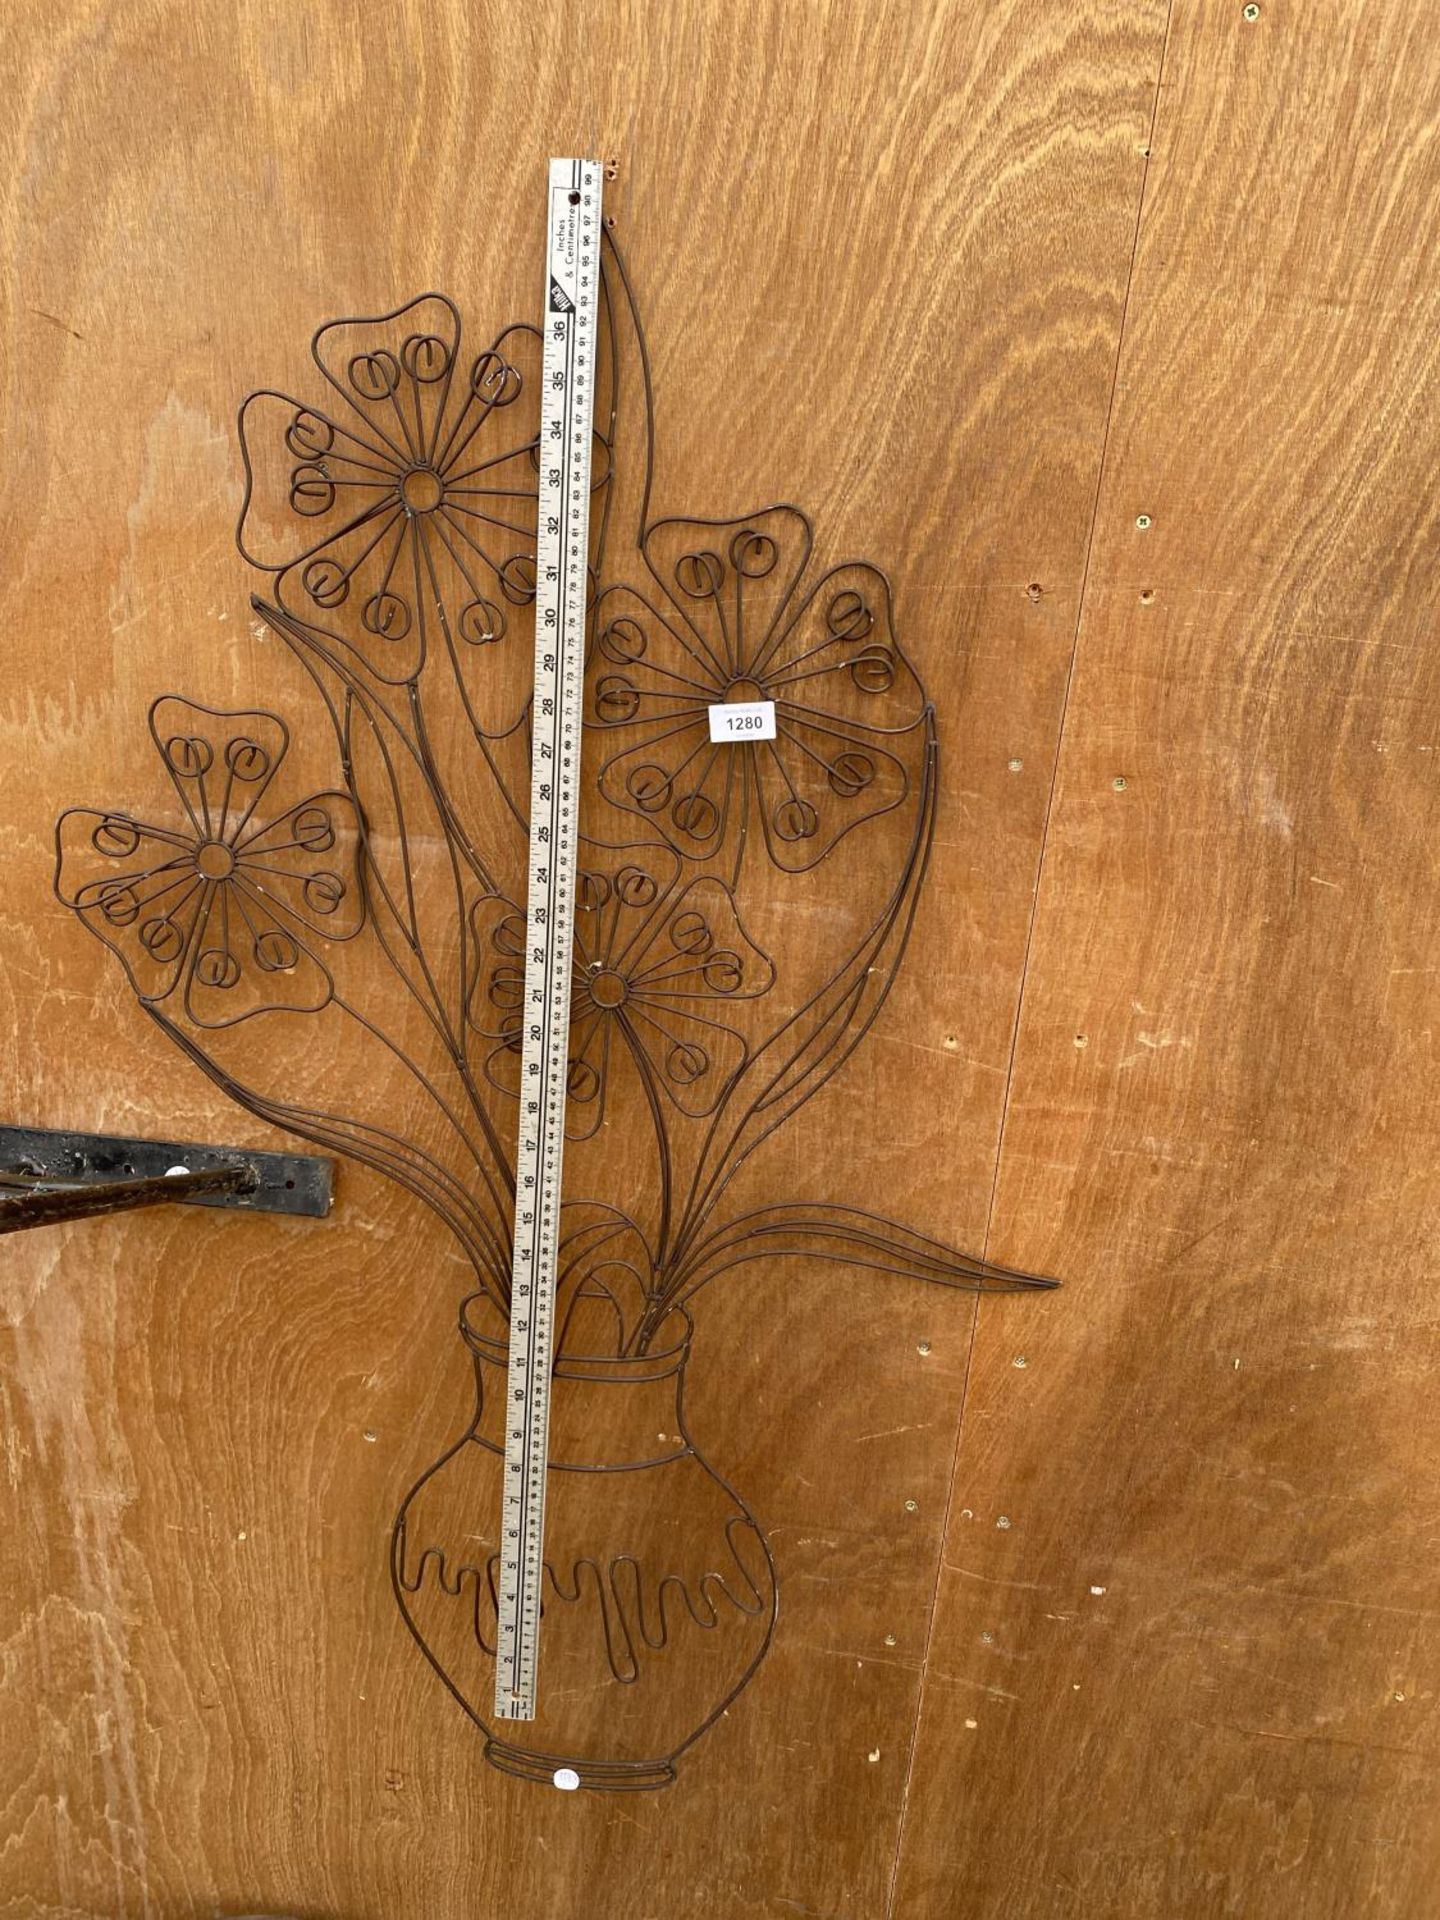 A BENT METAL WALL HANGING OF A VASE OF FLOWERS - Image 5 of 5